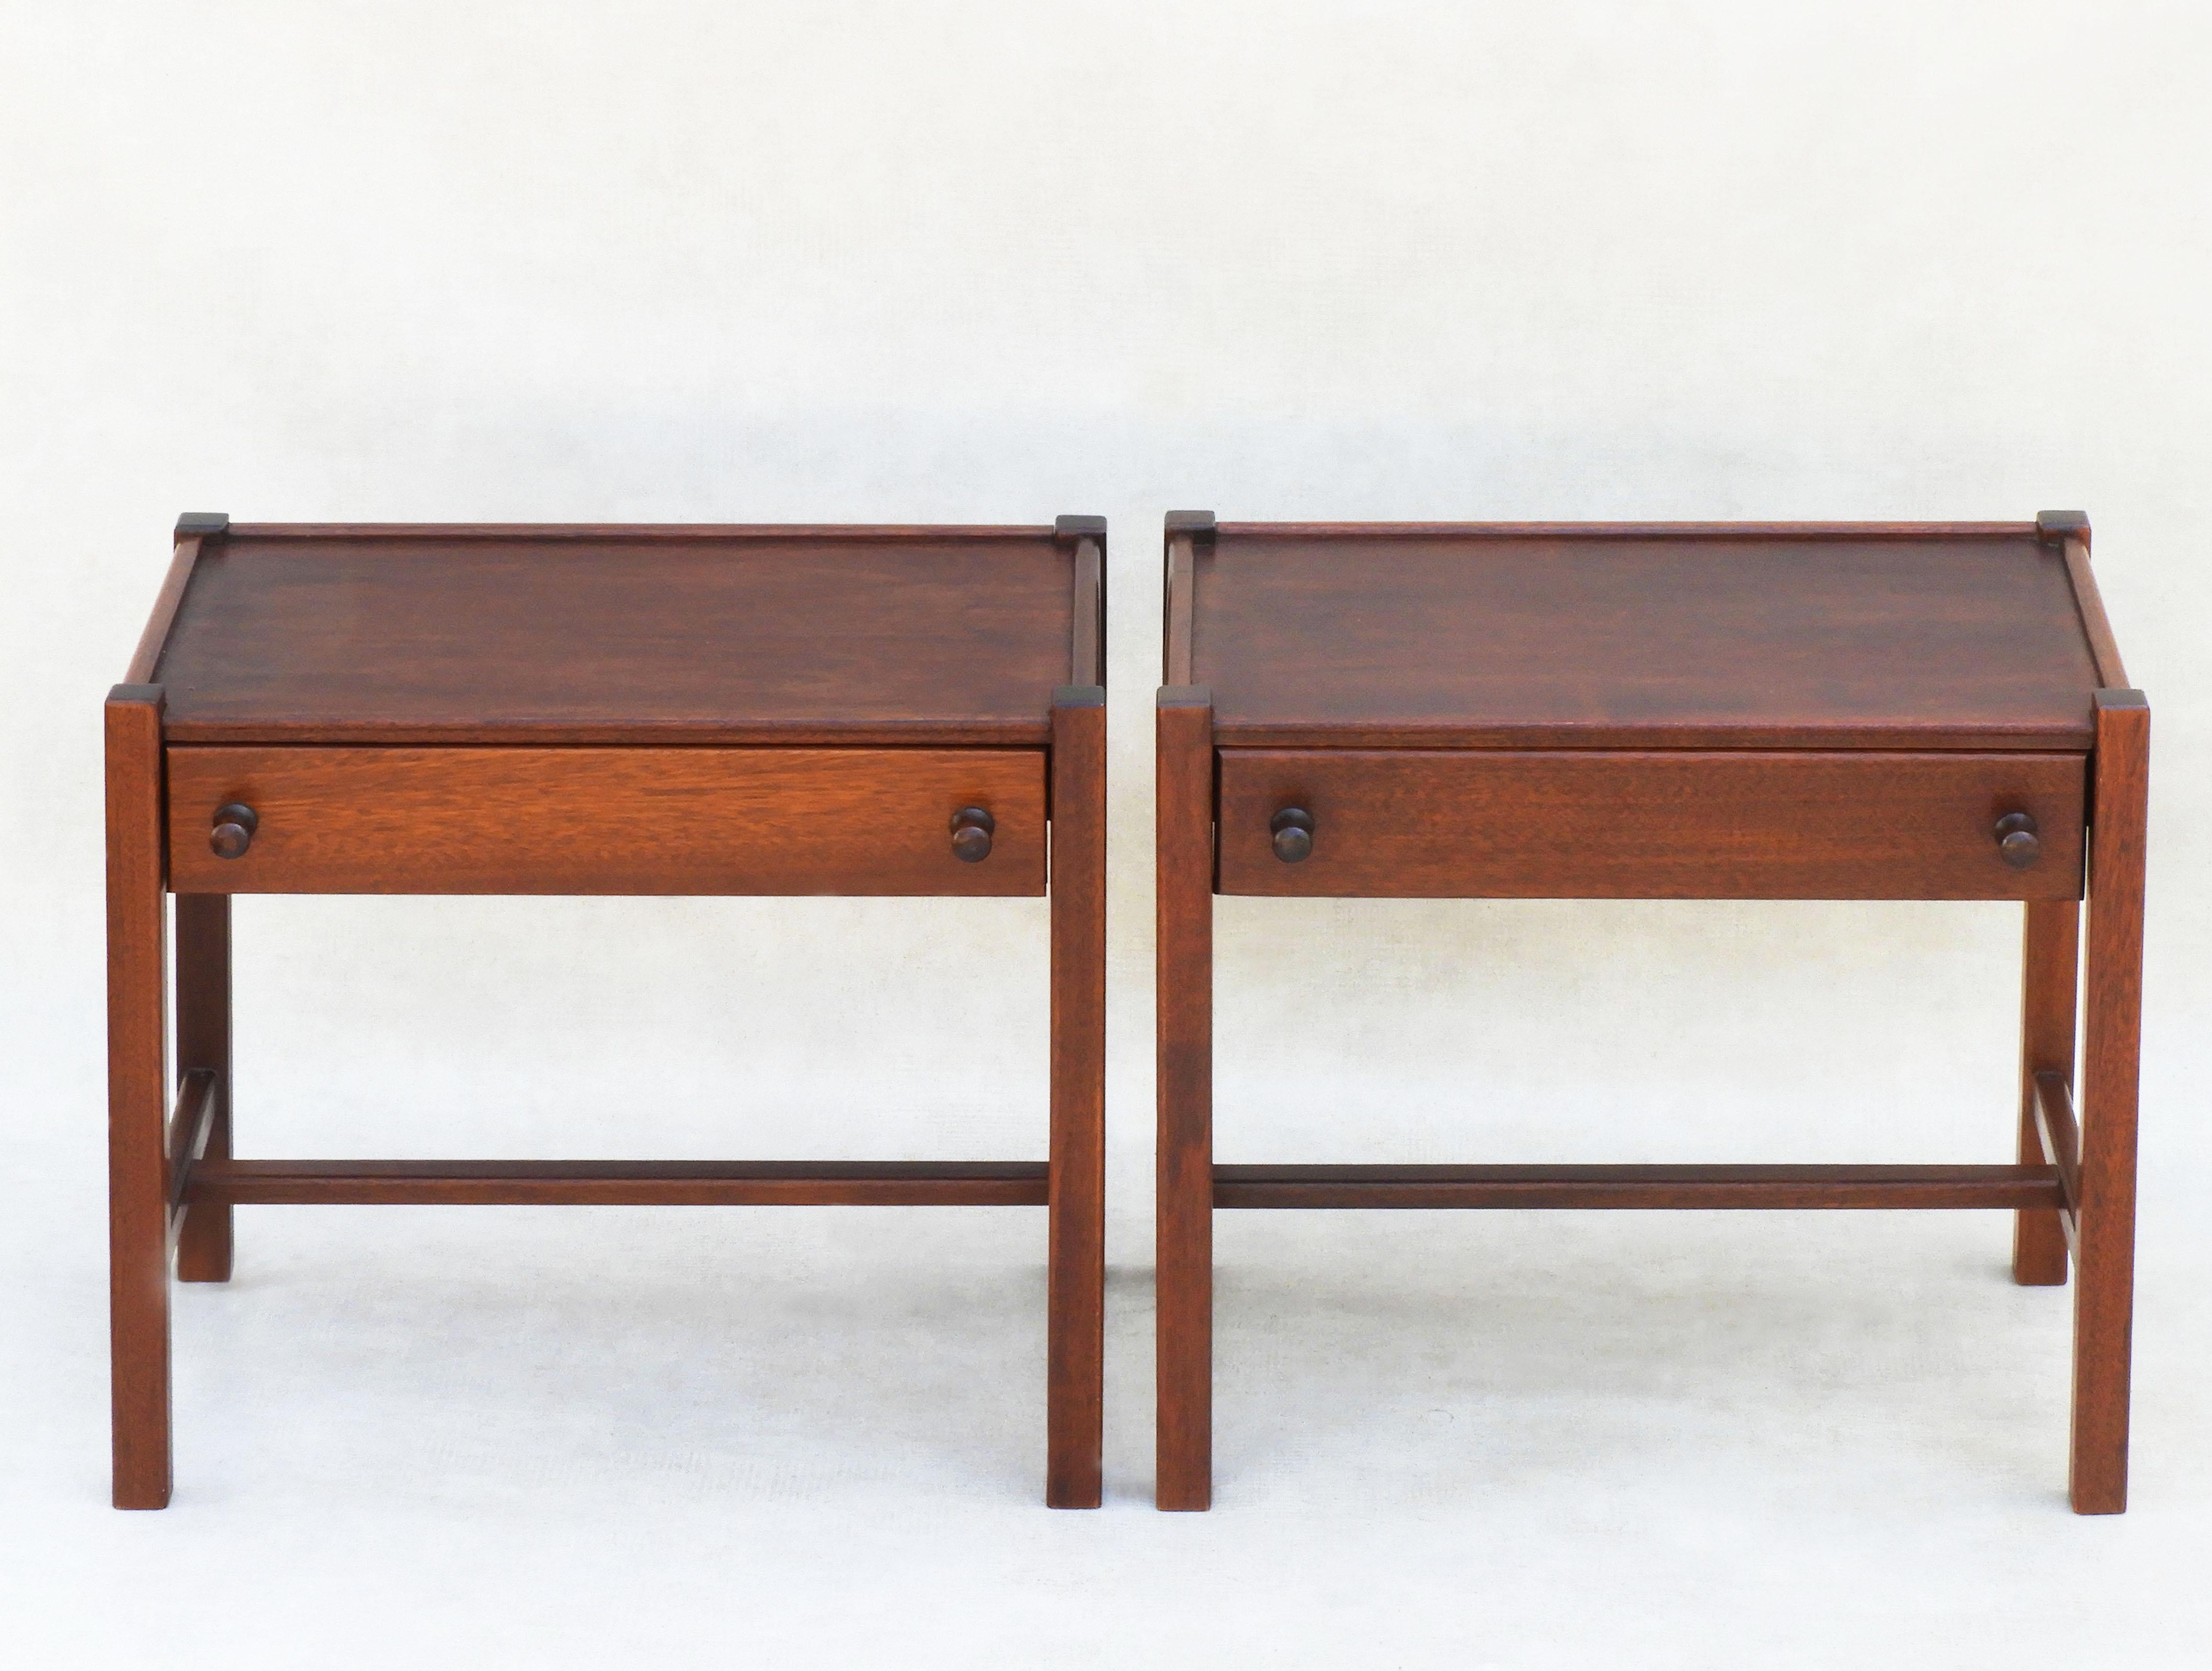 Wood Pair of Vintage French Nightstands or Sofa End Tables, c1970 FREE SHIPPING